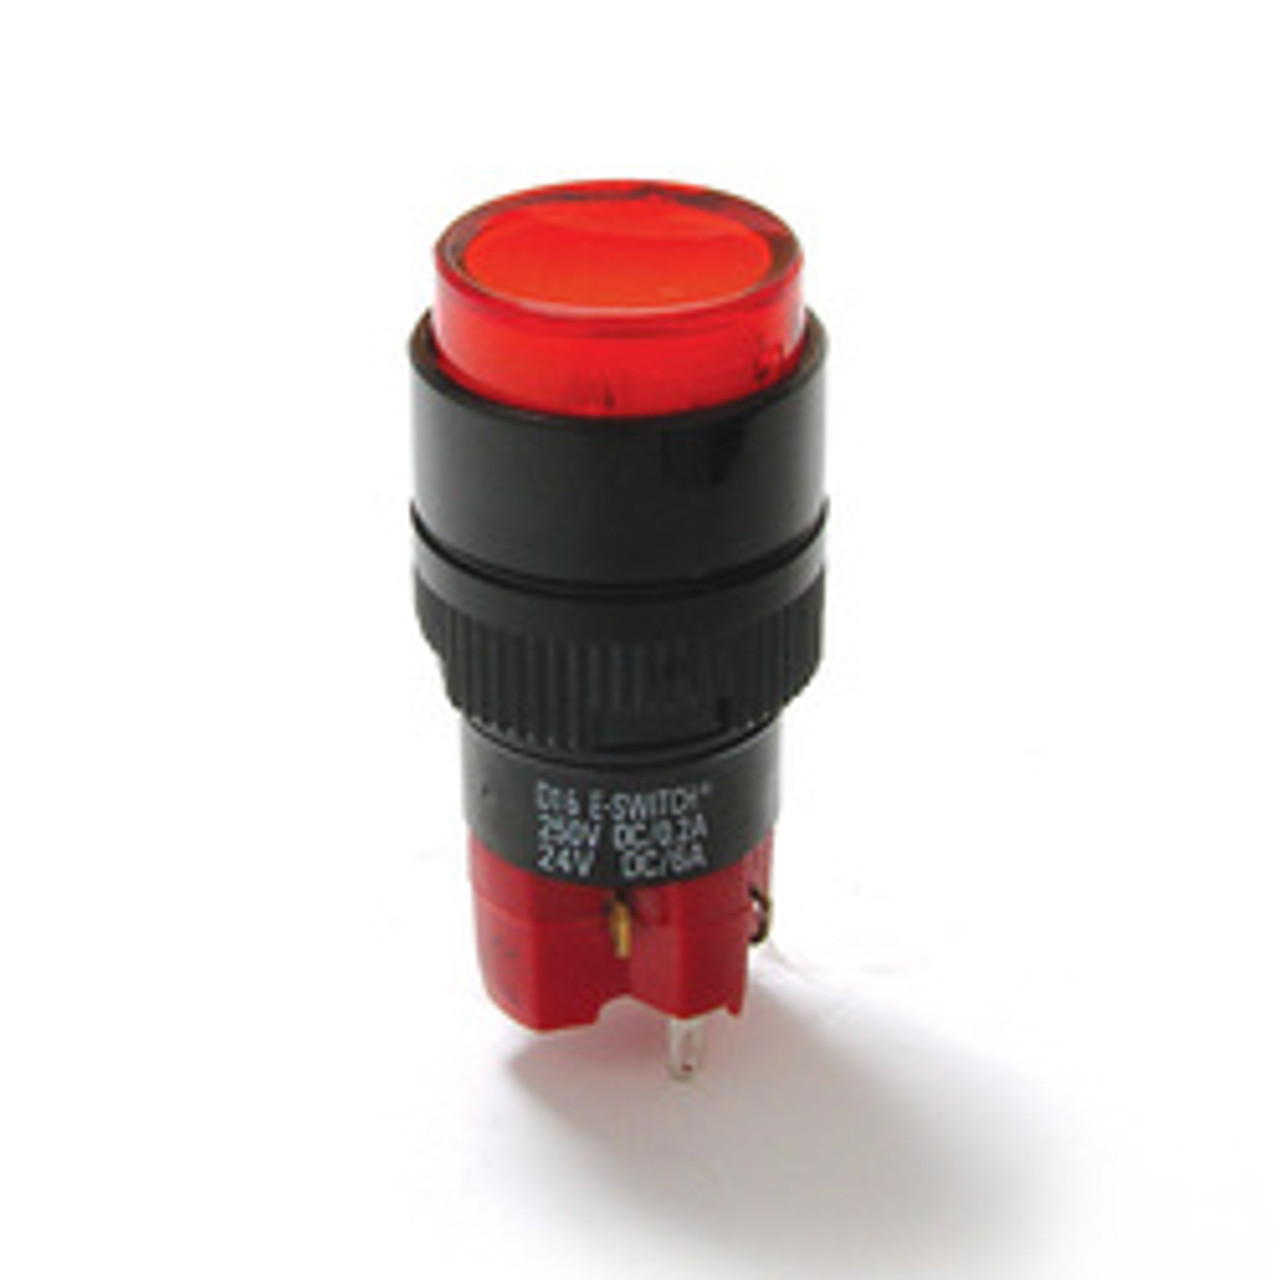 E-Switch D16EER3GRED Pushbutton Switches